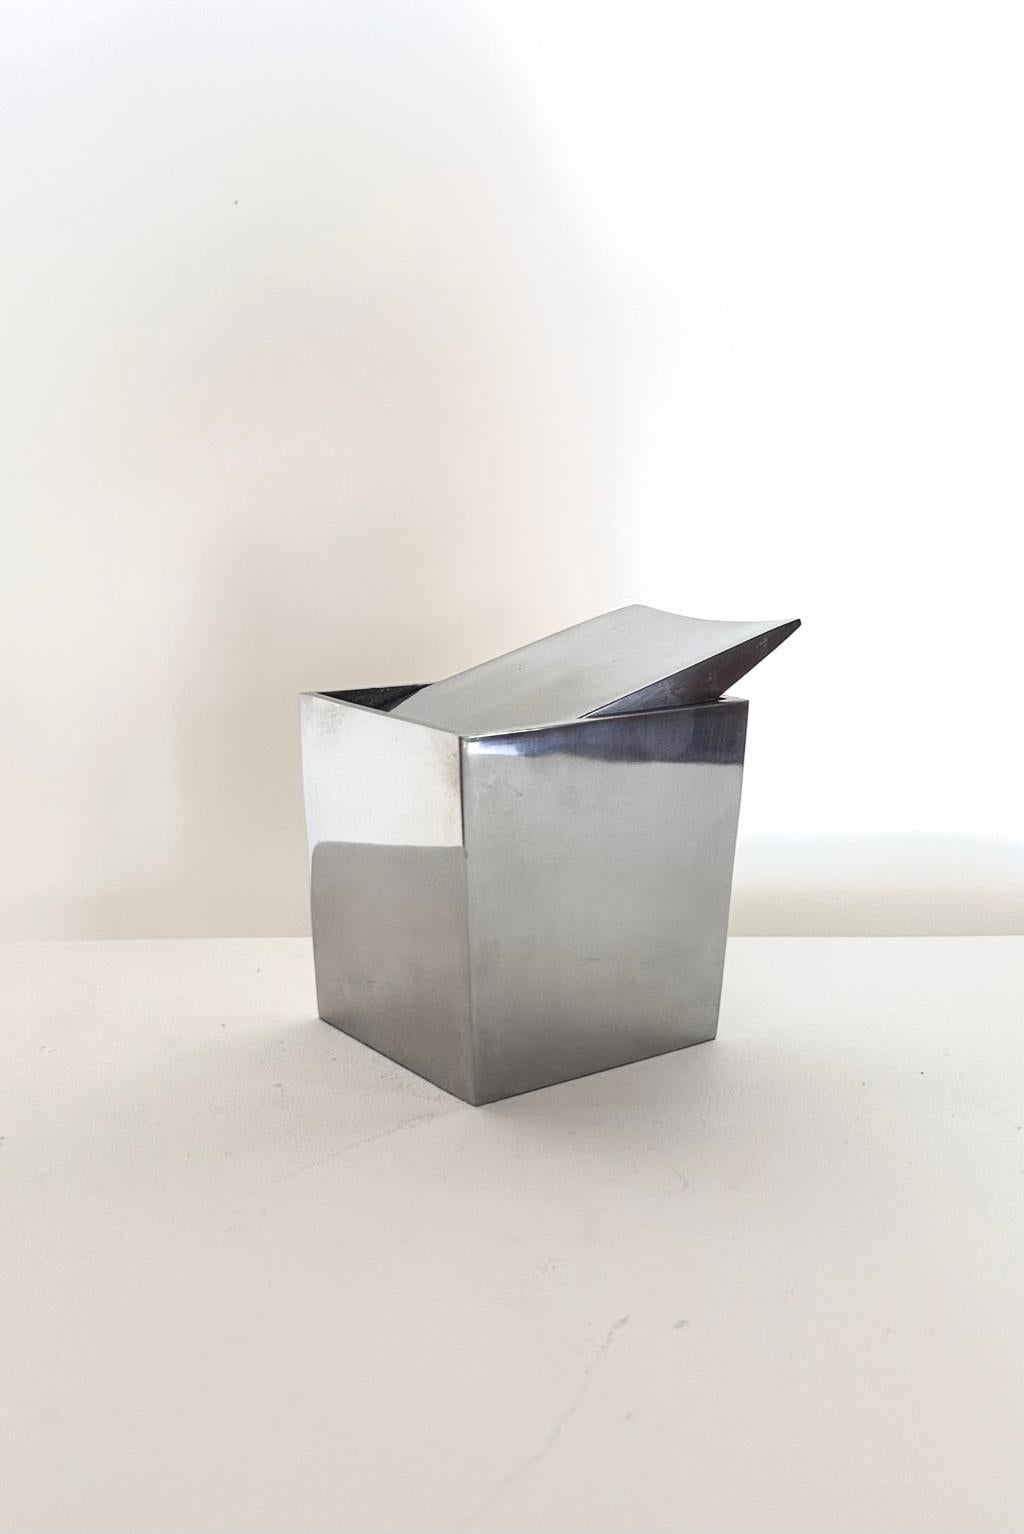 
French modern aluminum table ashtray Ray Hollis by Philippe Starck, 1986
Fantastic and iconic table ashtray mod. Ray Hollis with rectangular aluminum base. The structure tends to shrink towards the bottom. 
The ashtray was designed in 1986. The